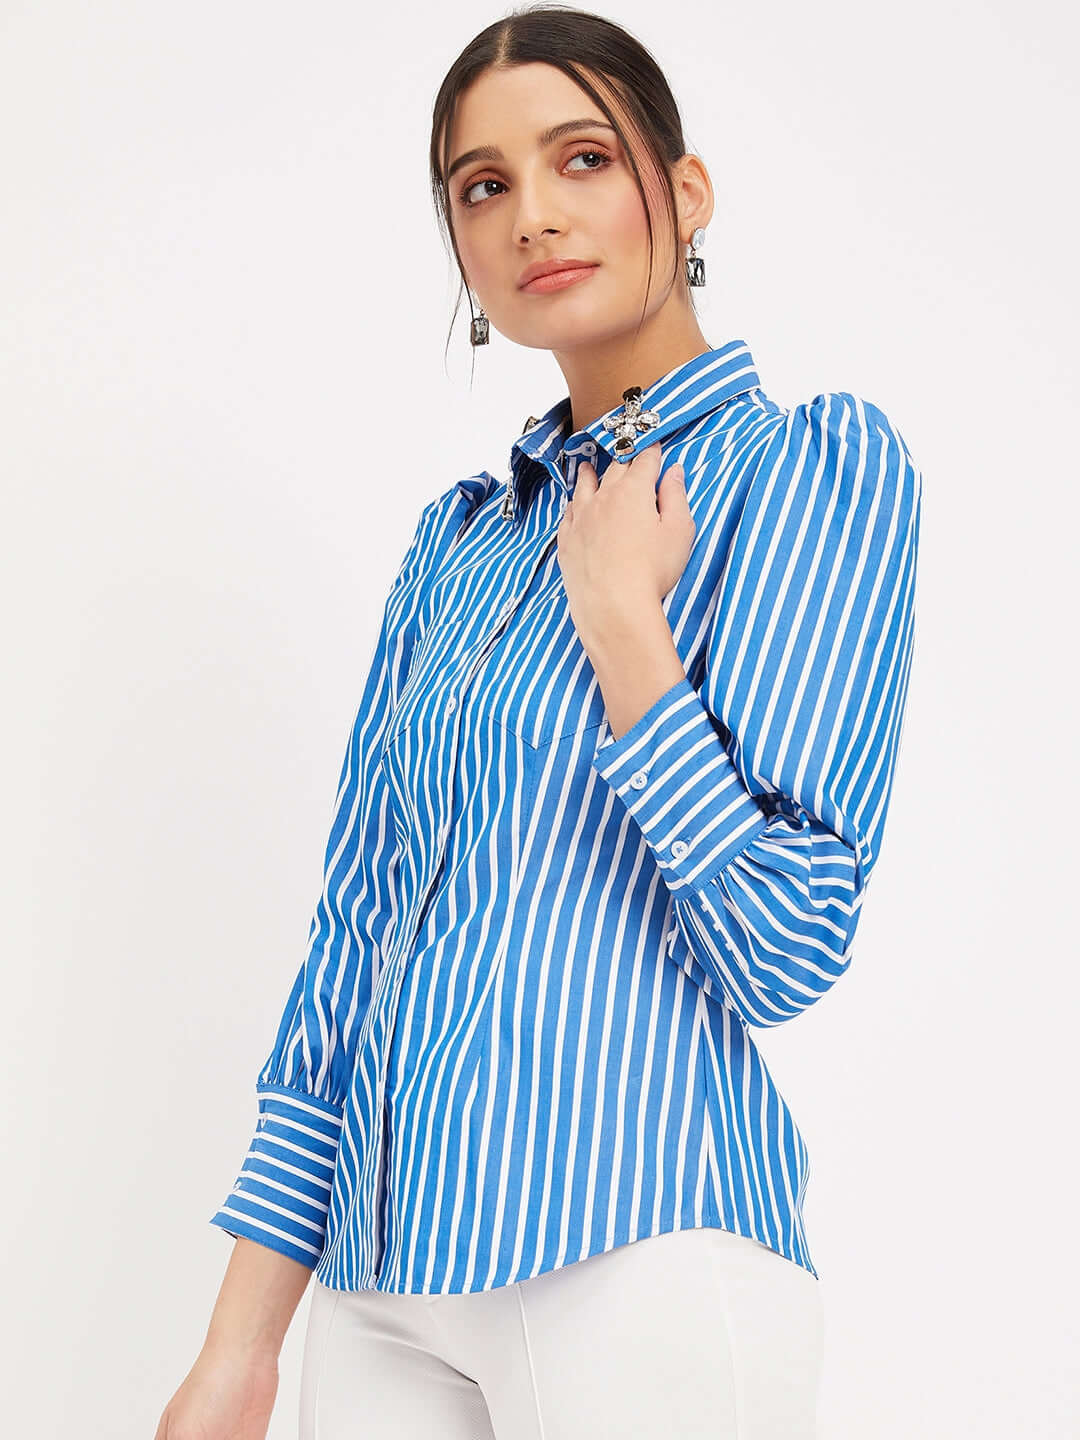 Blue and White Cotton Stripes Shirt for Women - ANTIMONY